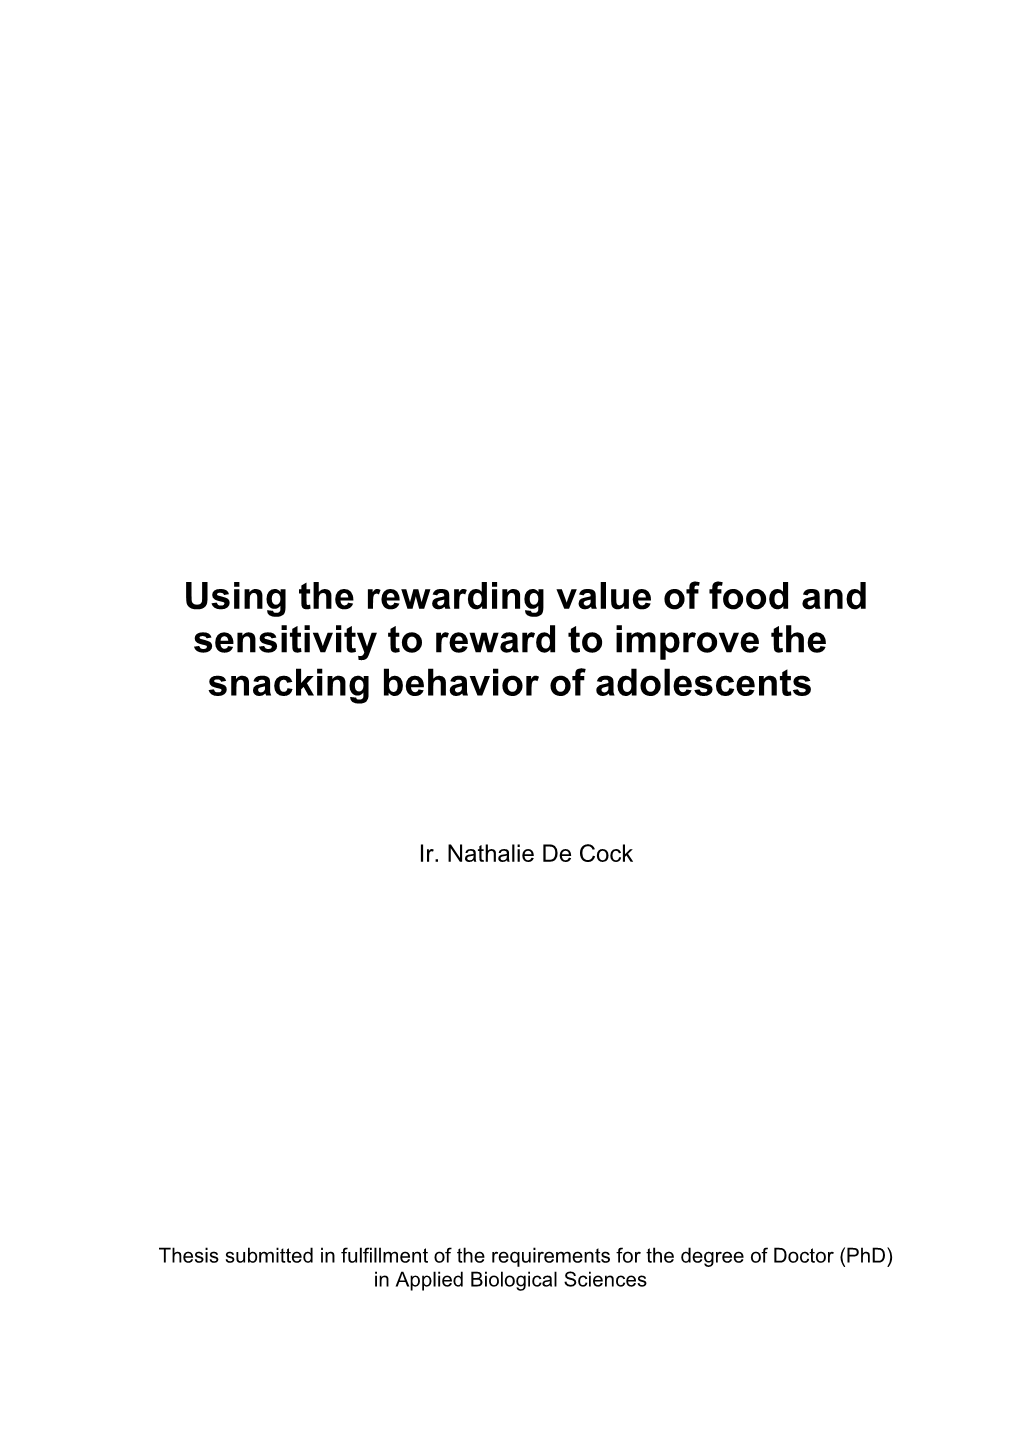 Using the Rewarding Value of Food and Sensitivity to Reward to Improve the Snacking Behavior of Adolescents